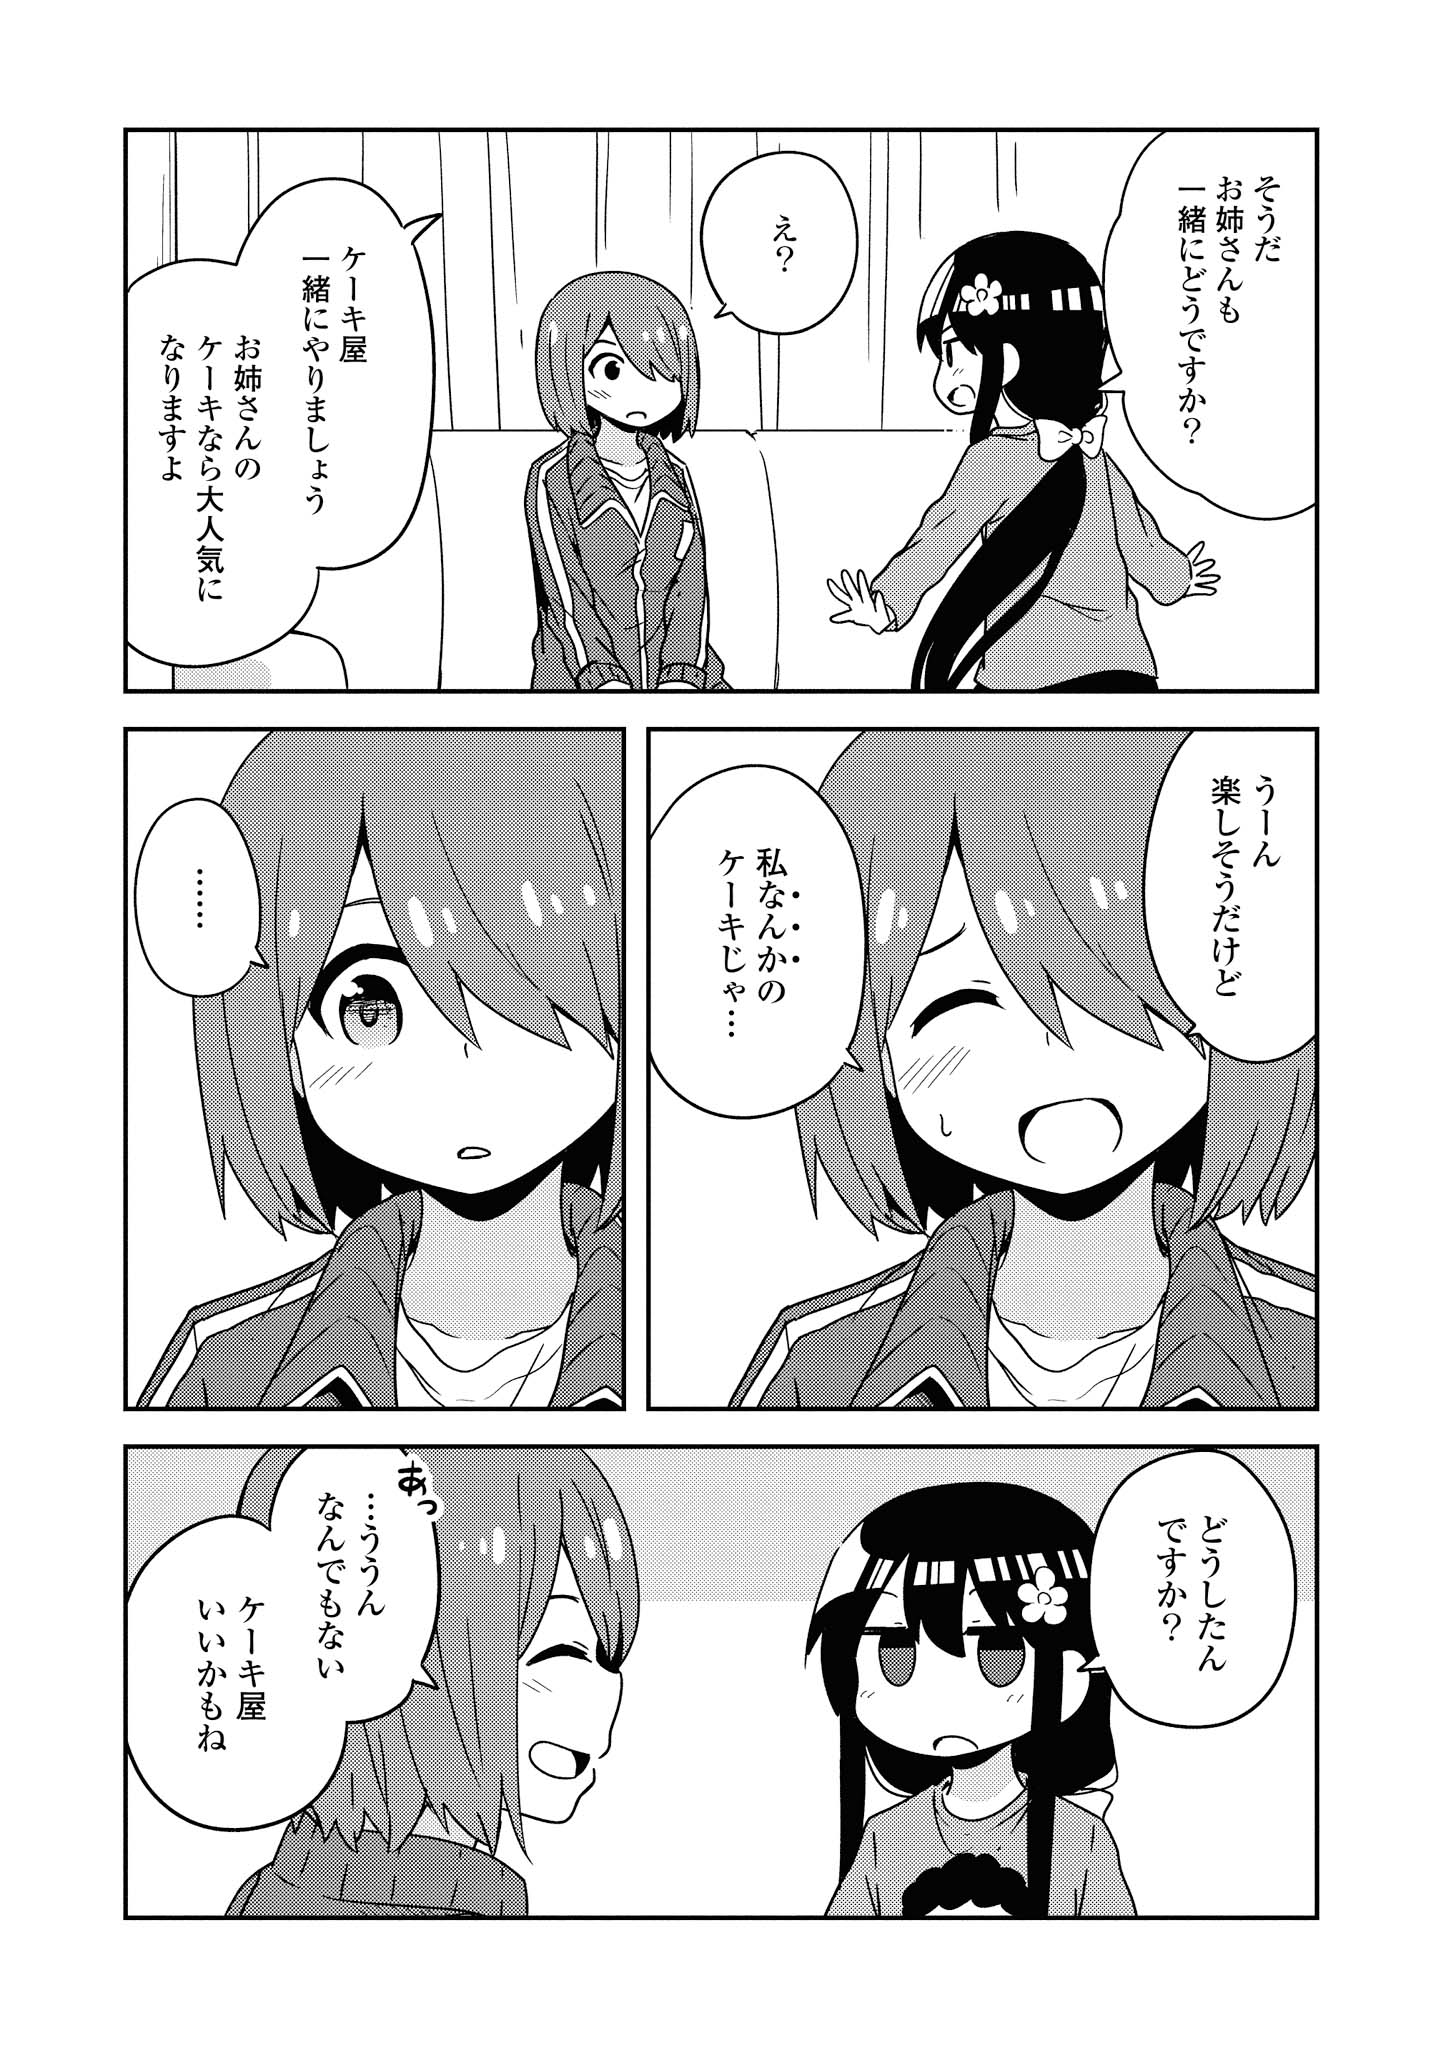 Wataten! An Angel Flew Down to Me 私に天使が舞い降りた！ 第51話 - Page 17